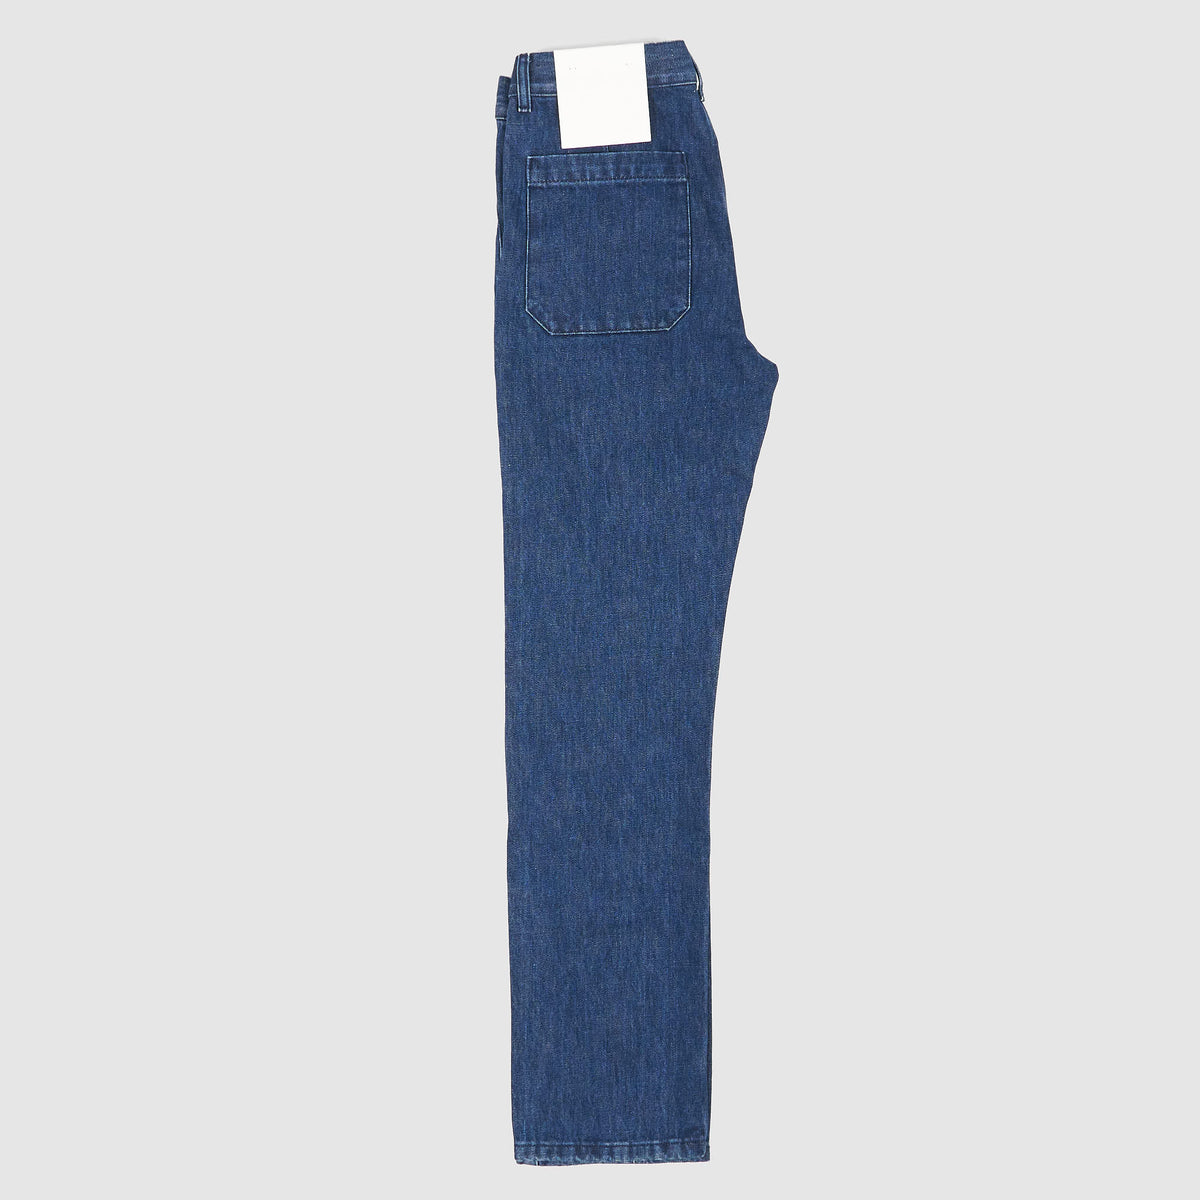 Jeanerica Ladies Marthe Work Style Jeans